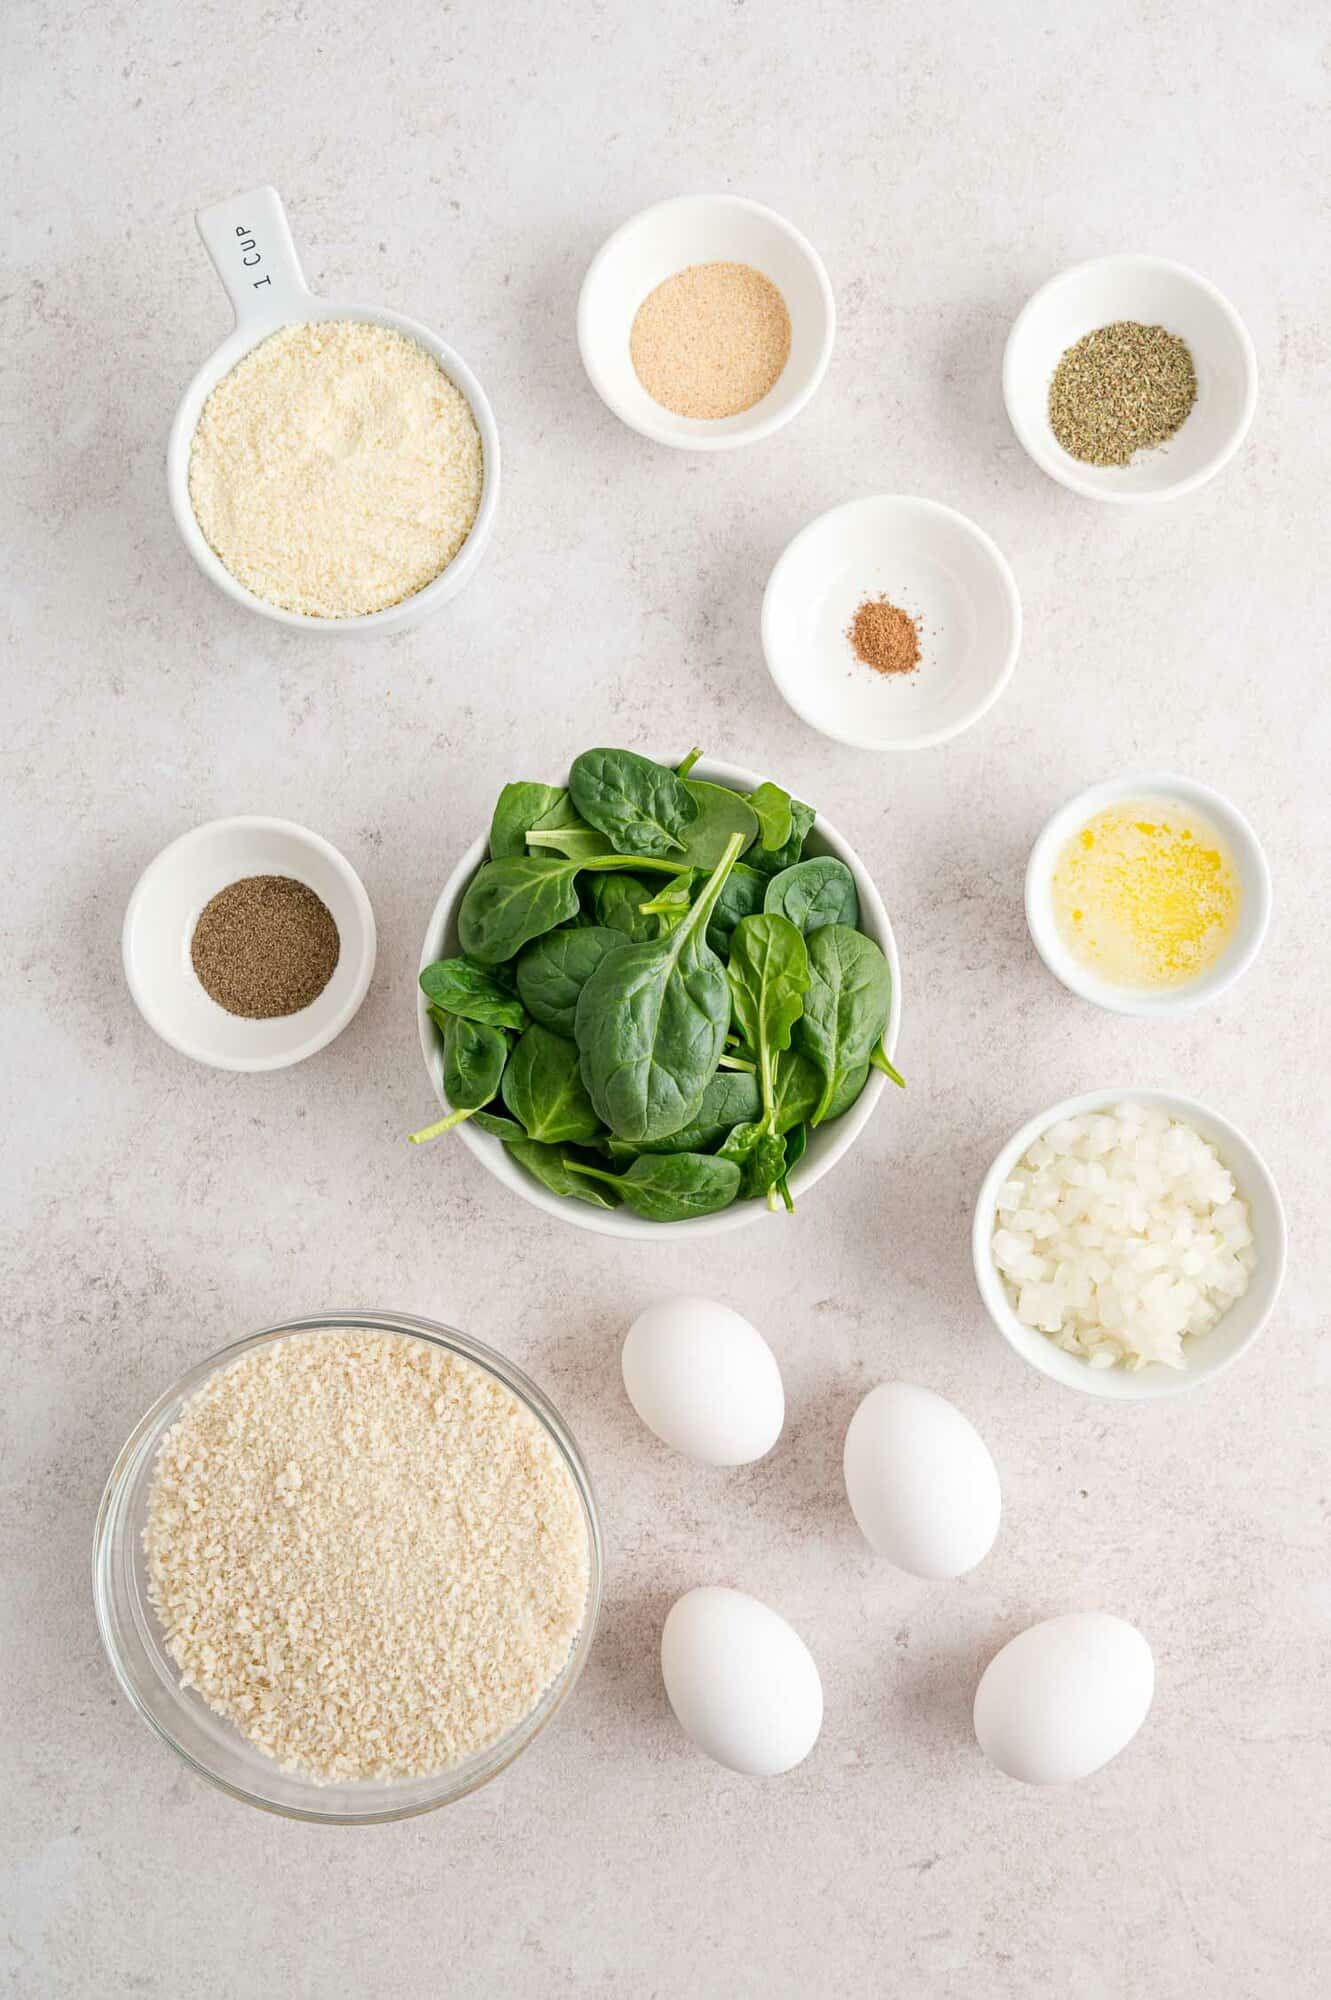 The ingredients for easy spinach balls.